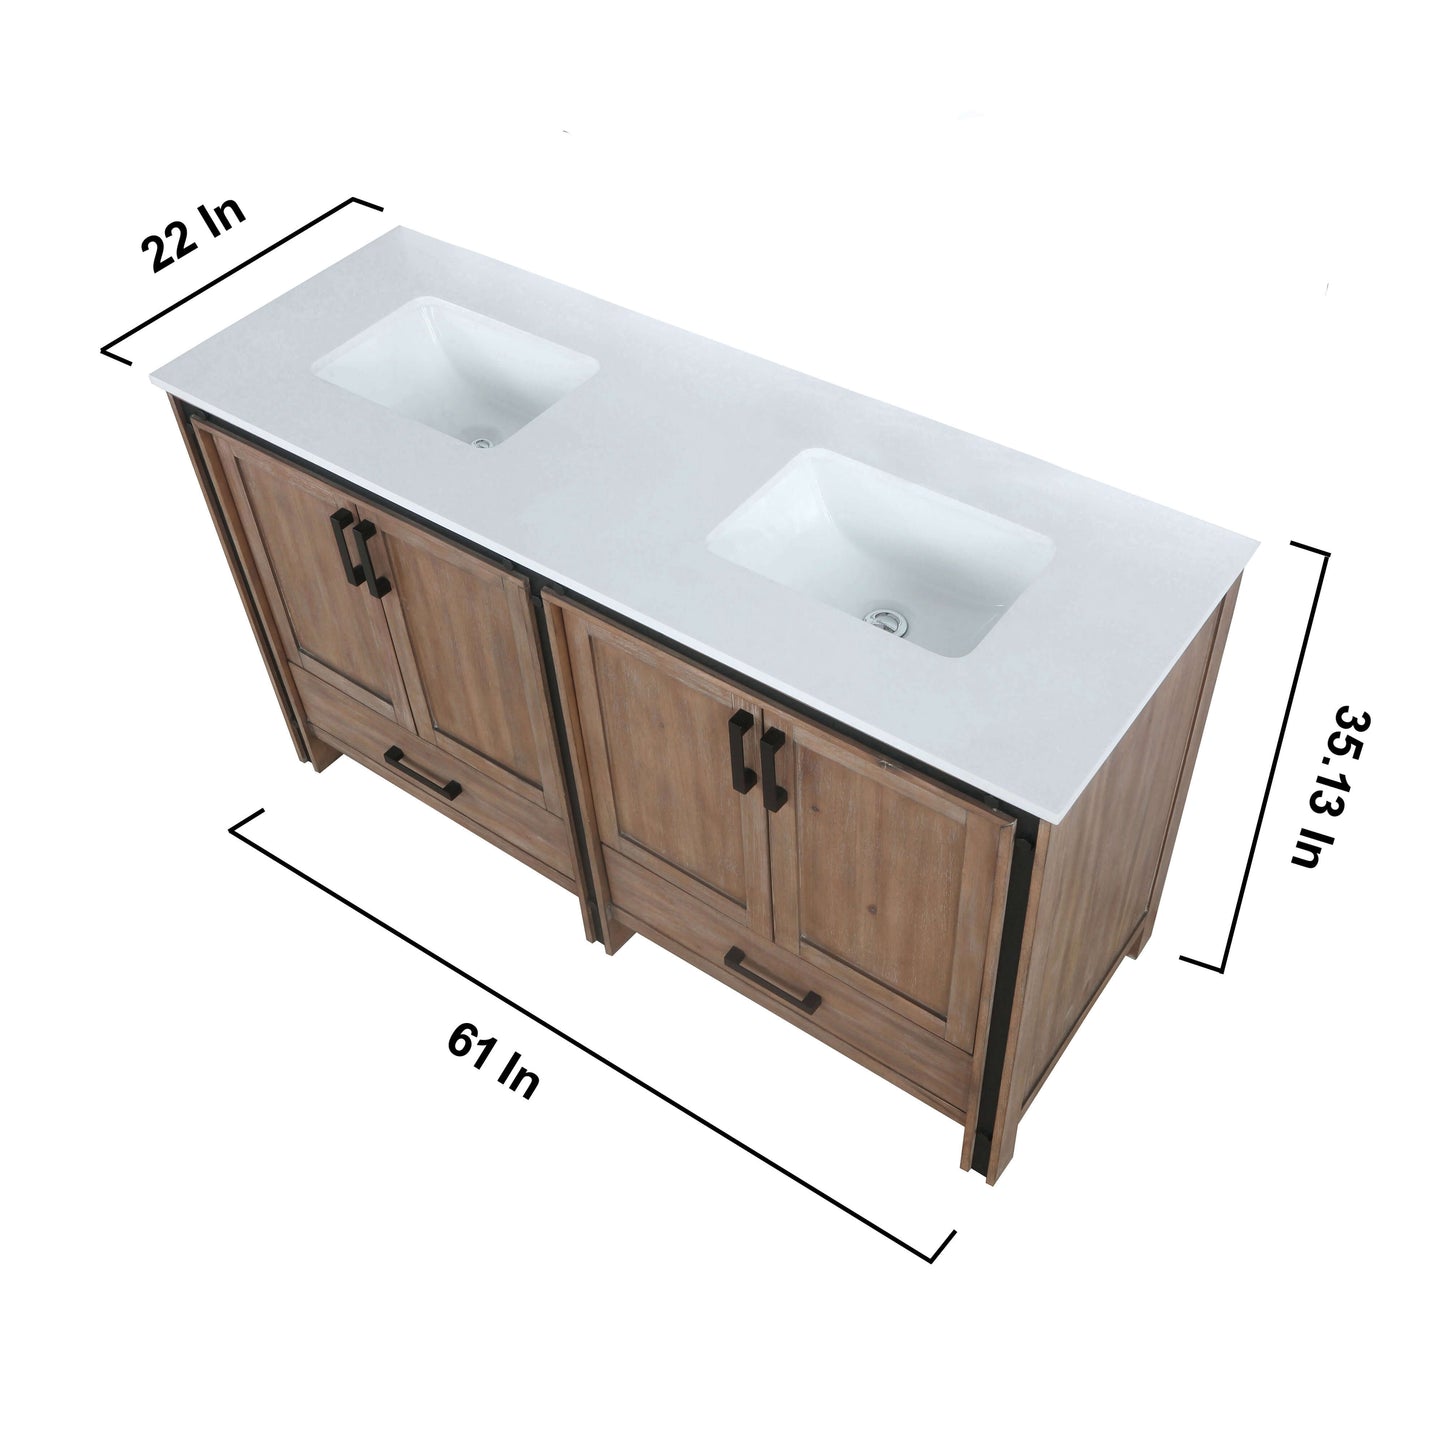 Ziva 60" Rustic Barnwood Double Vanity, Cultured Marble Top, White Square Sink and 22" Mirrors - LZV352260SNJSM22